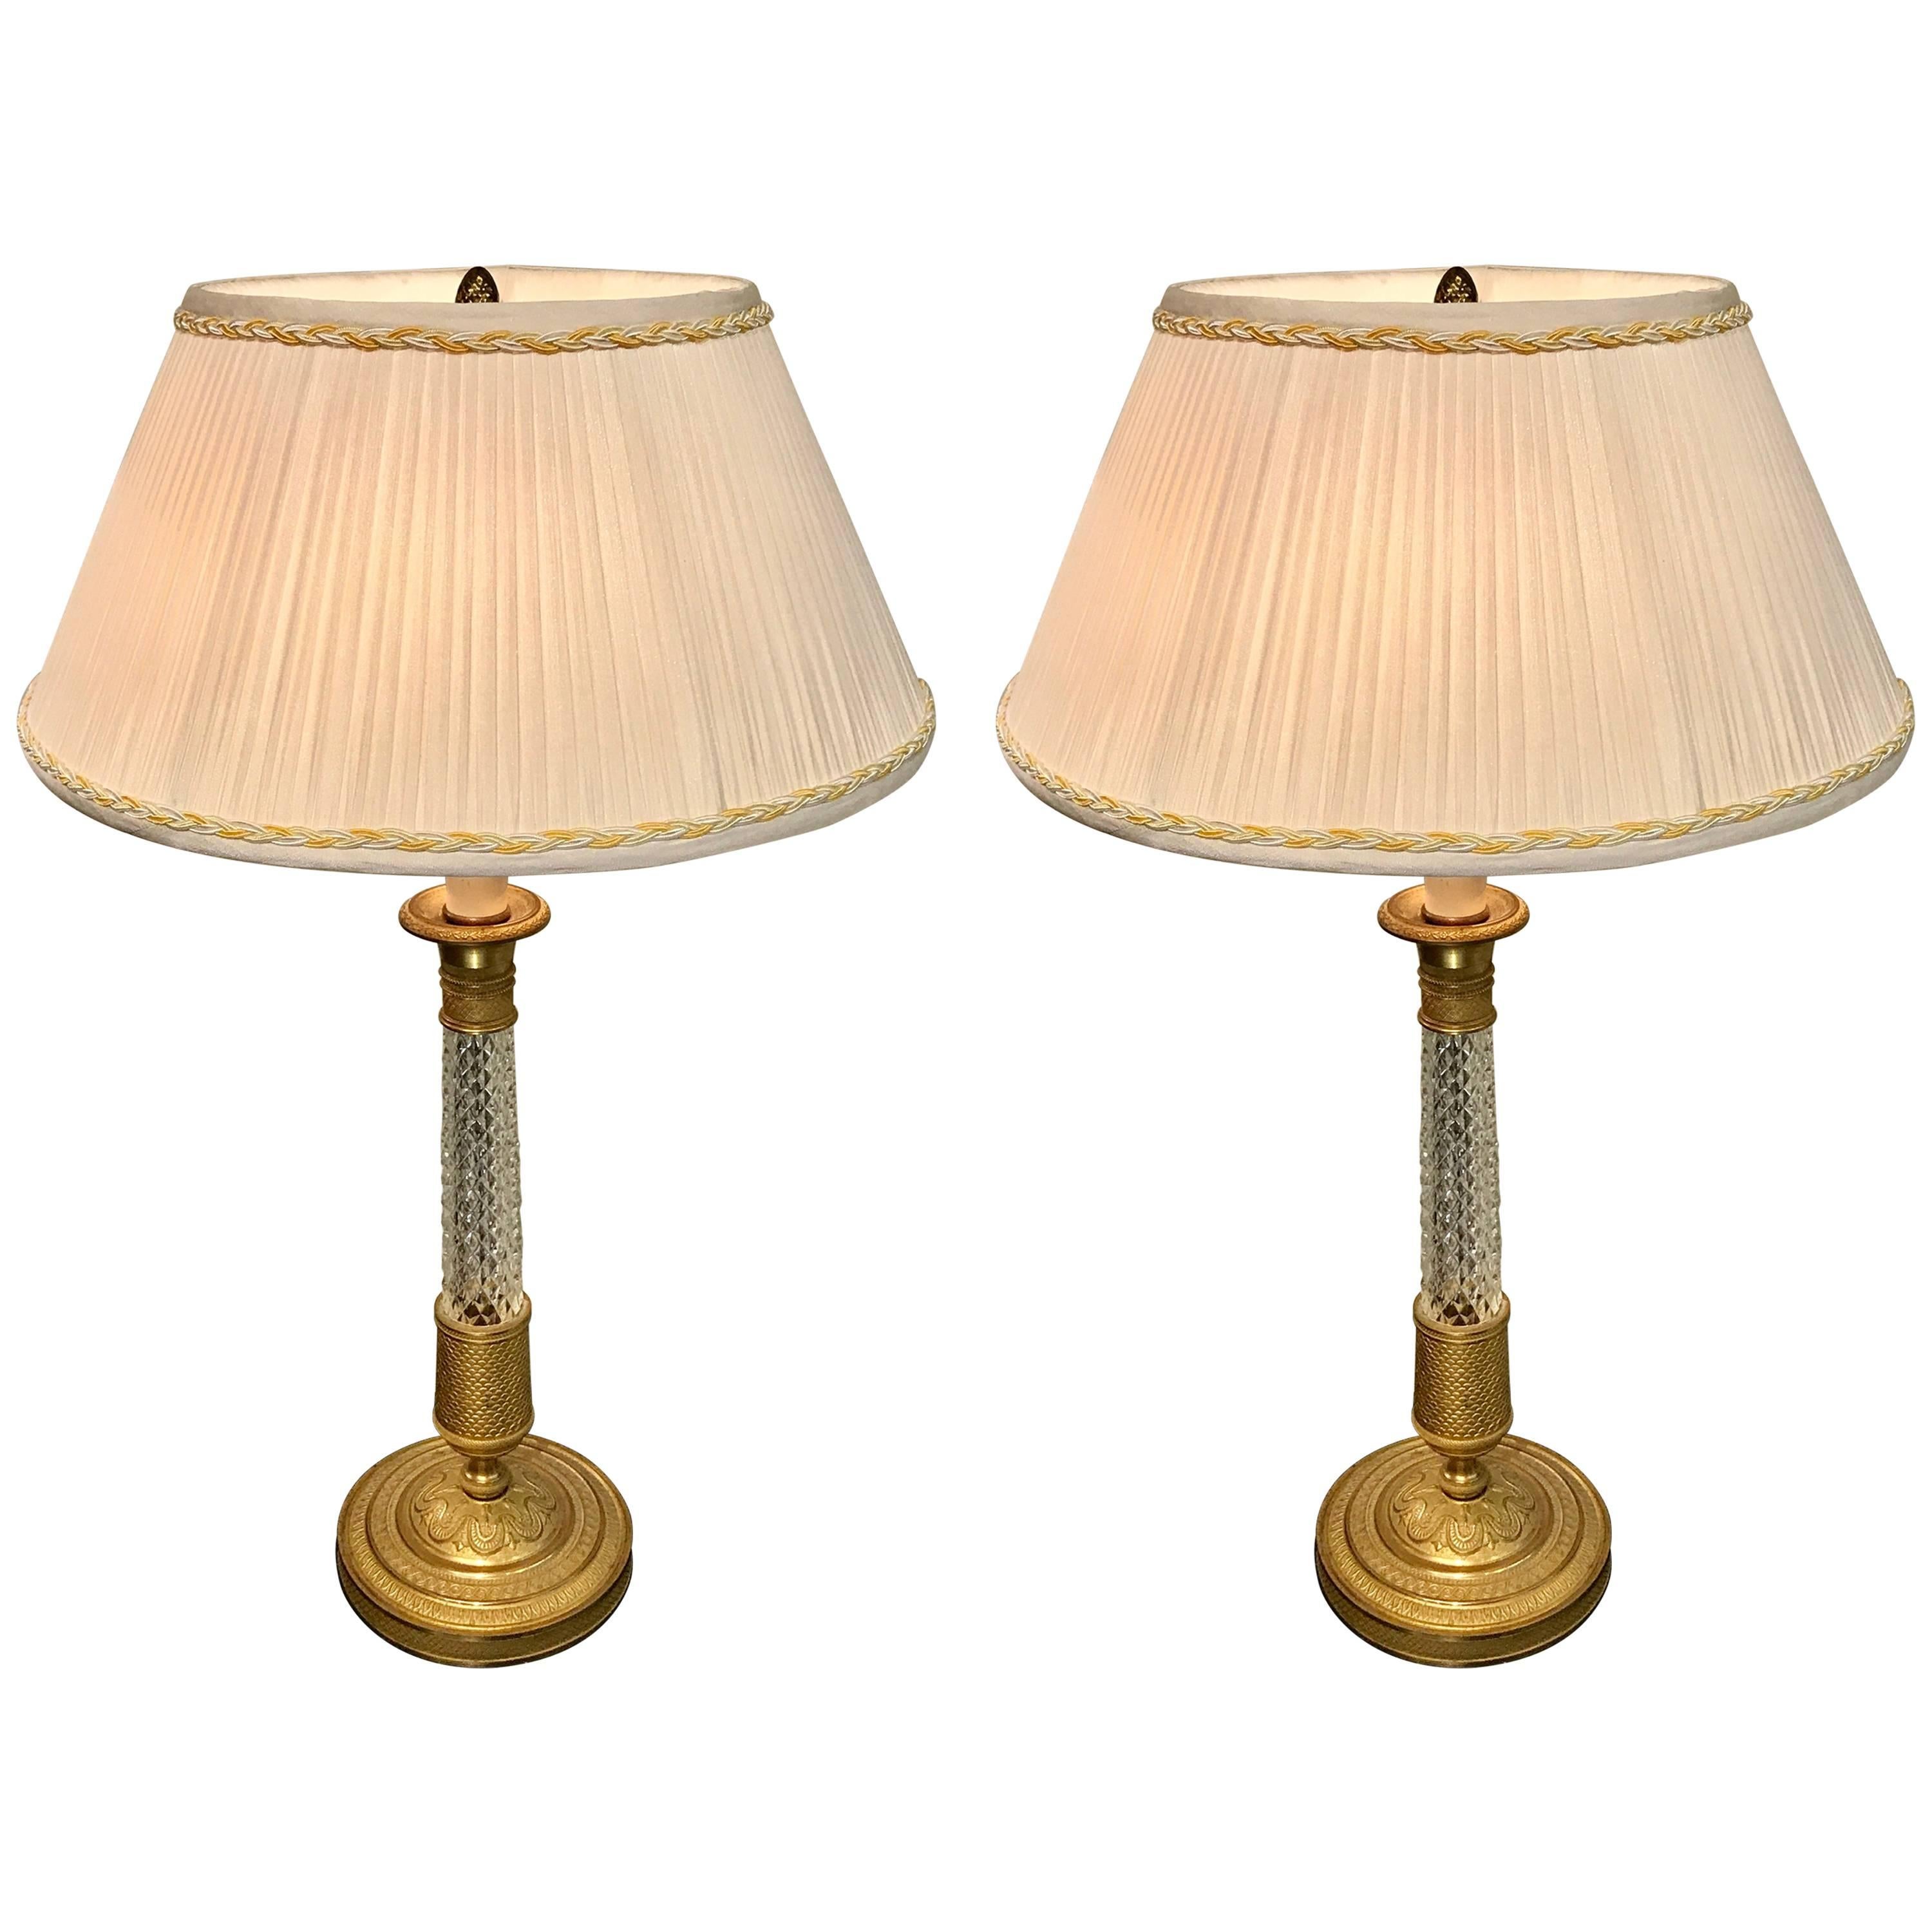 Pair of Ormolu-Mounted Baccarat Candlestick Lamps with Custom Shades